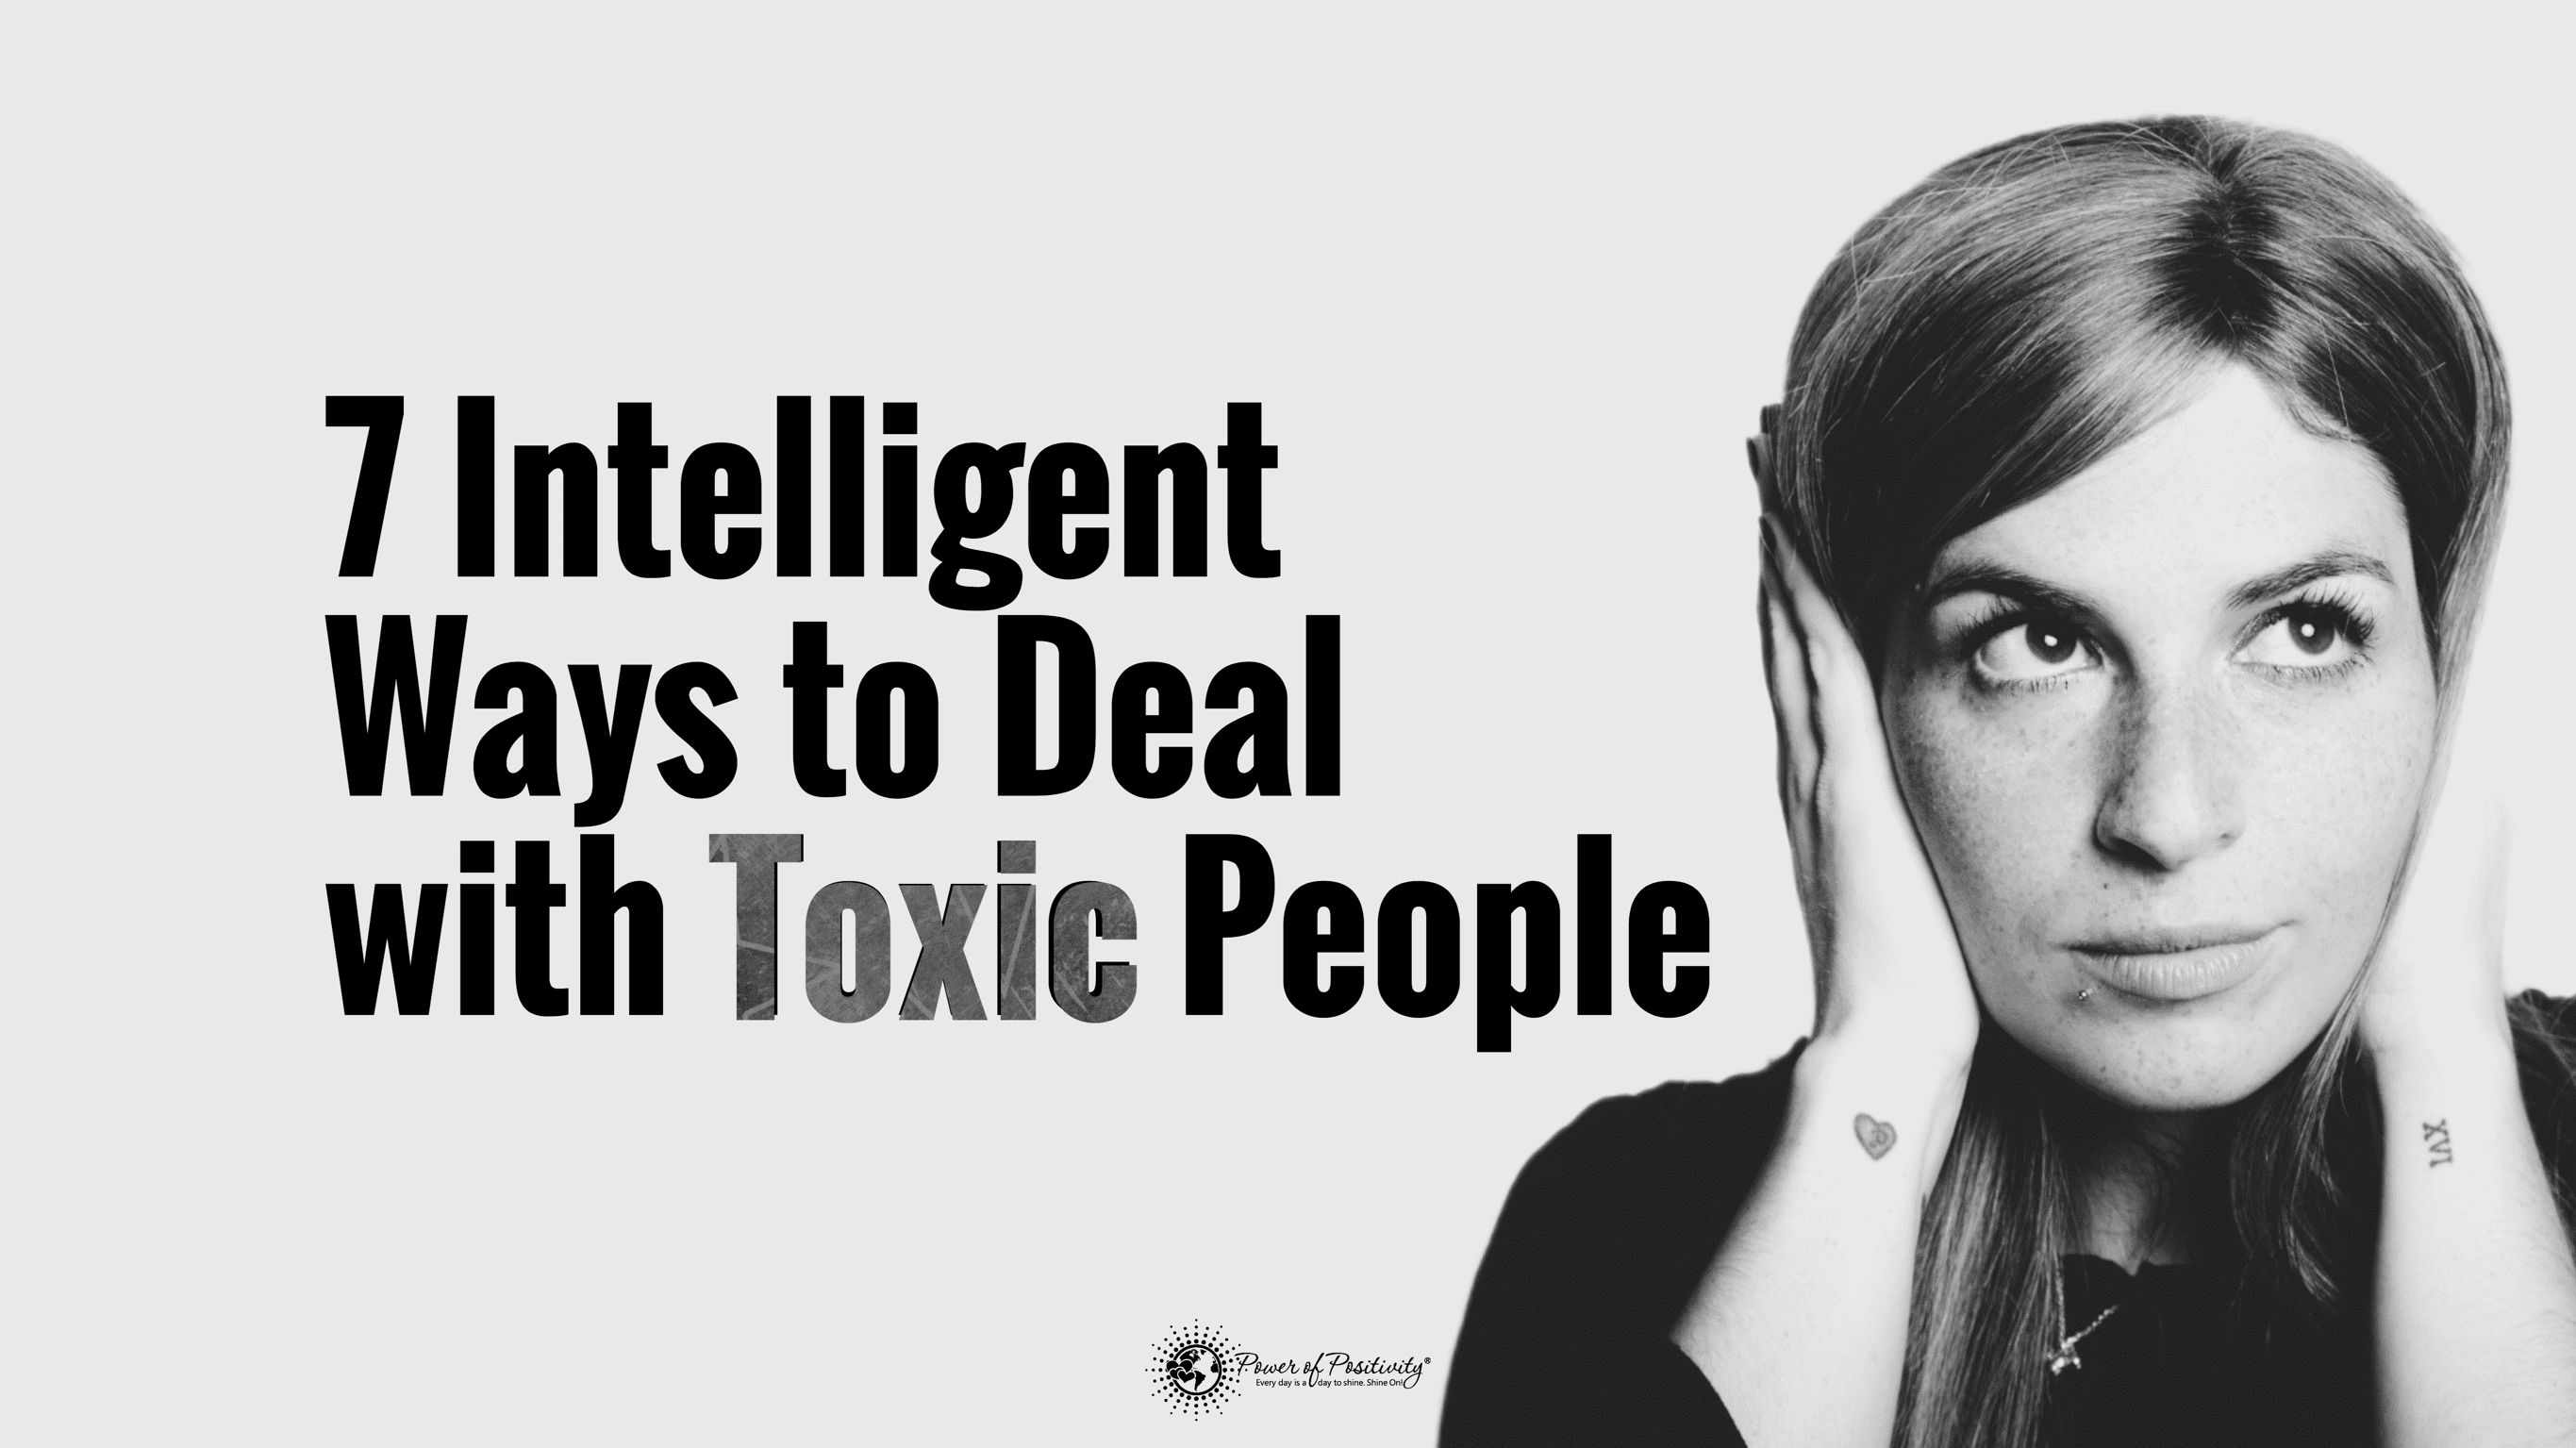 7 Intelligent Ways to Deal with Toxic People